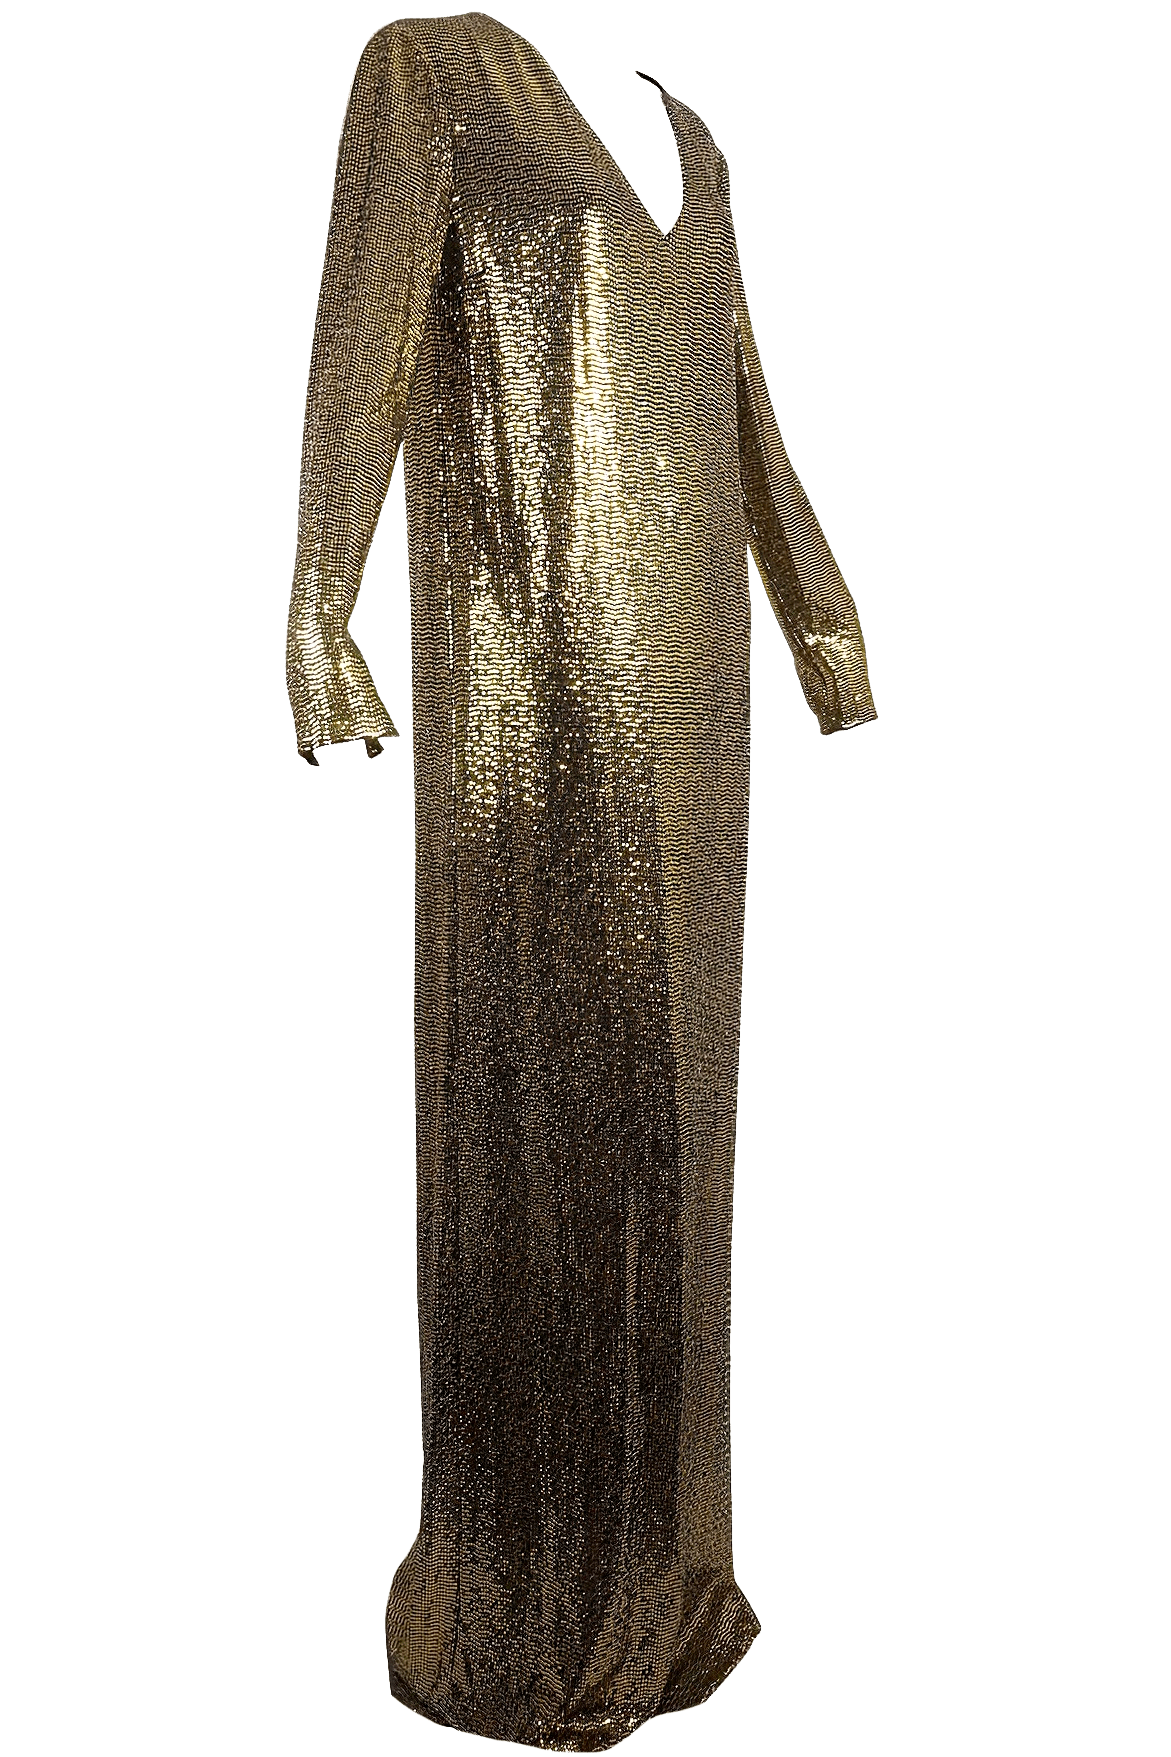 Gucci Snakeskin Pattern Laminated Gold Gown w/Patent Leather Choker